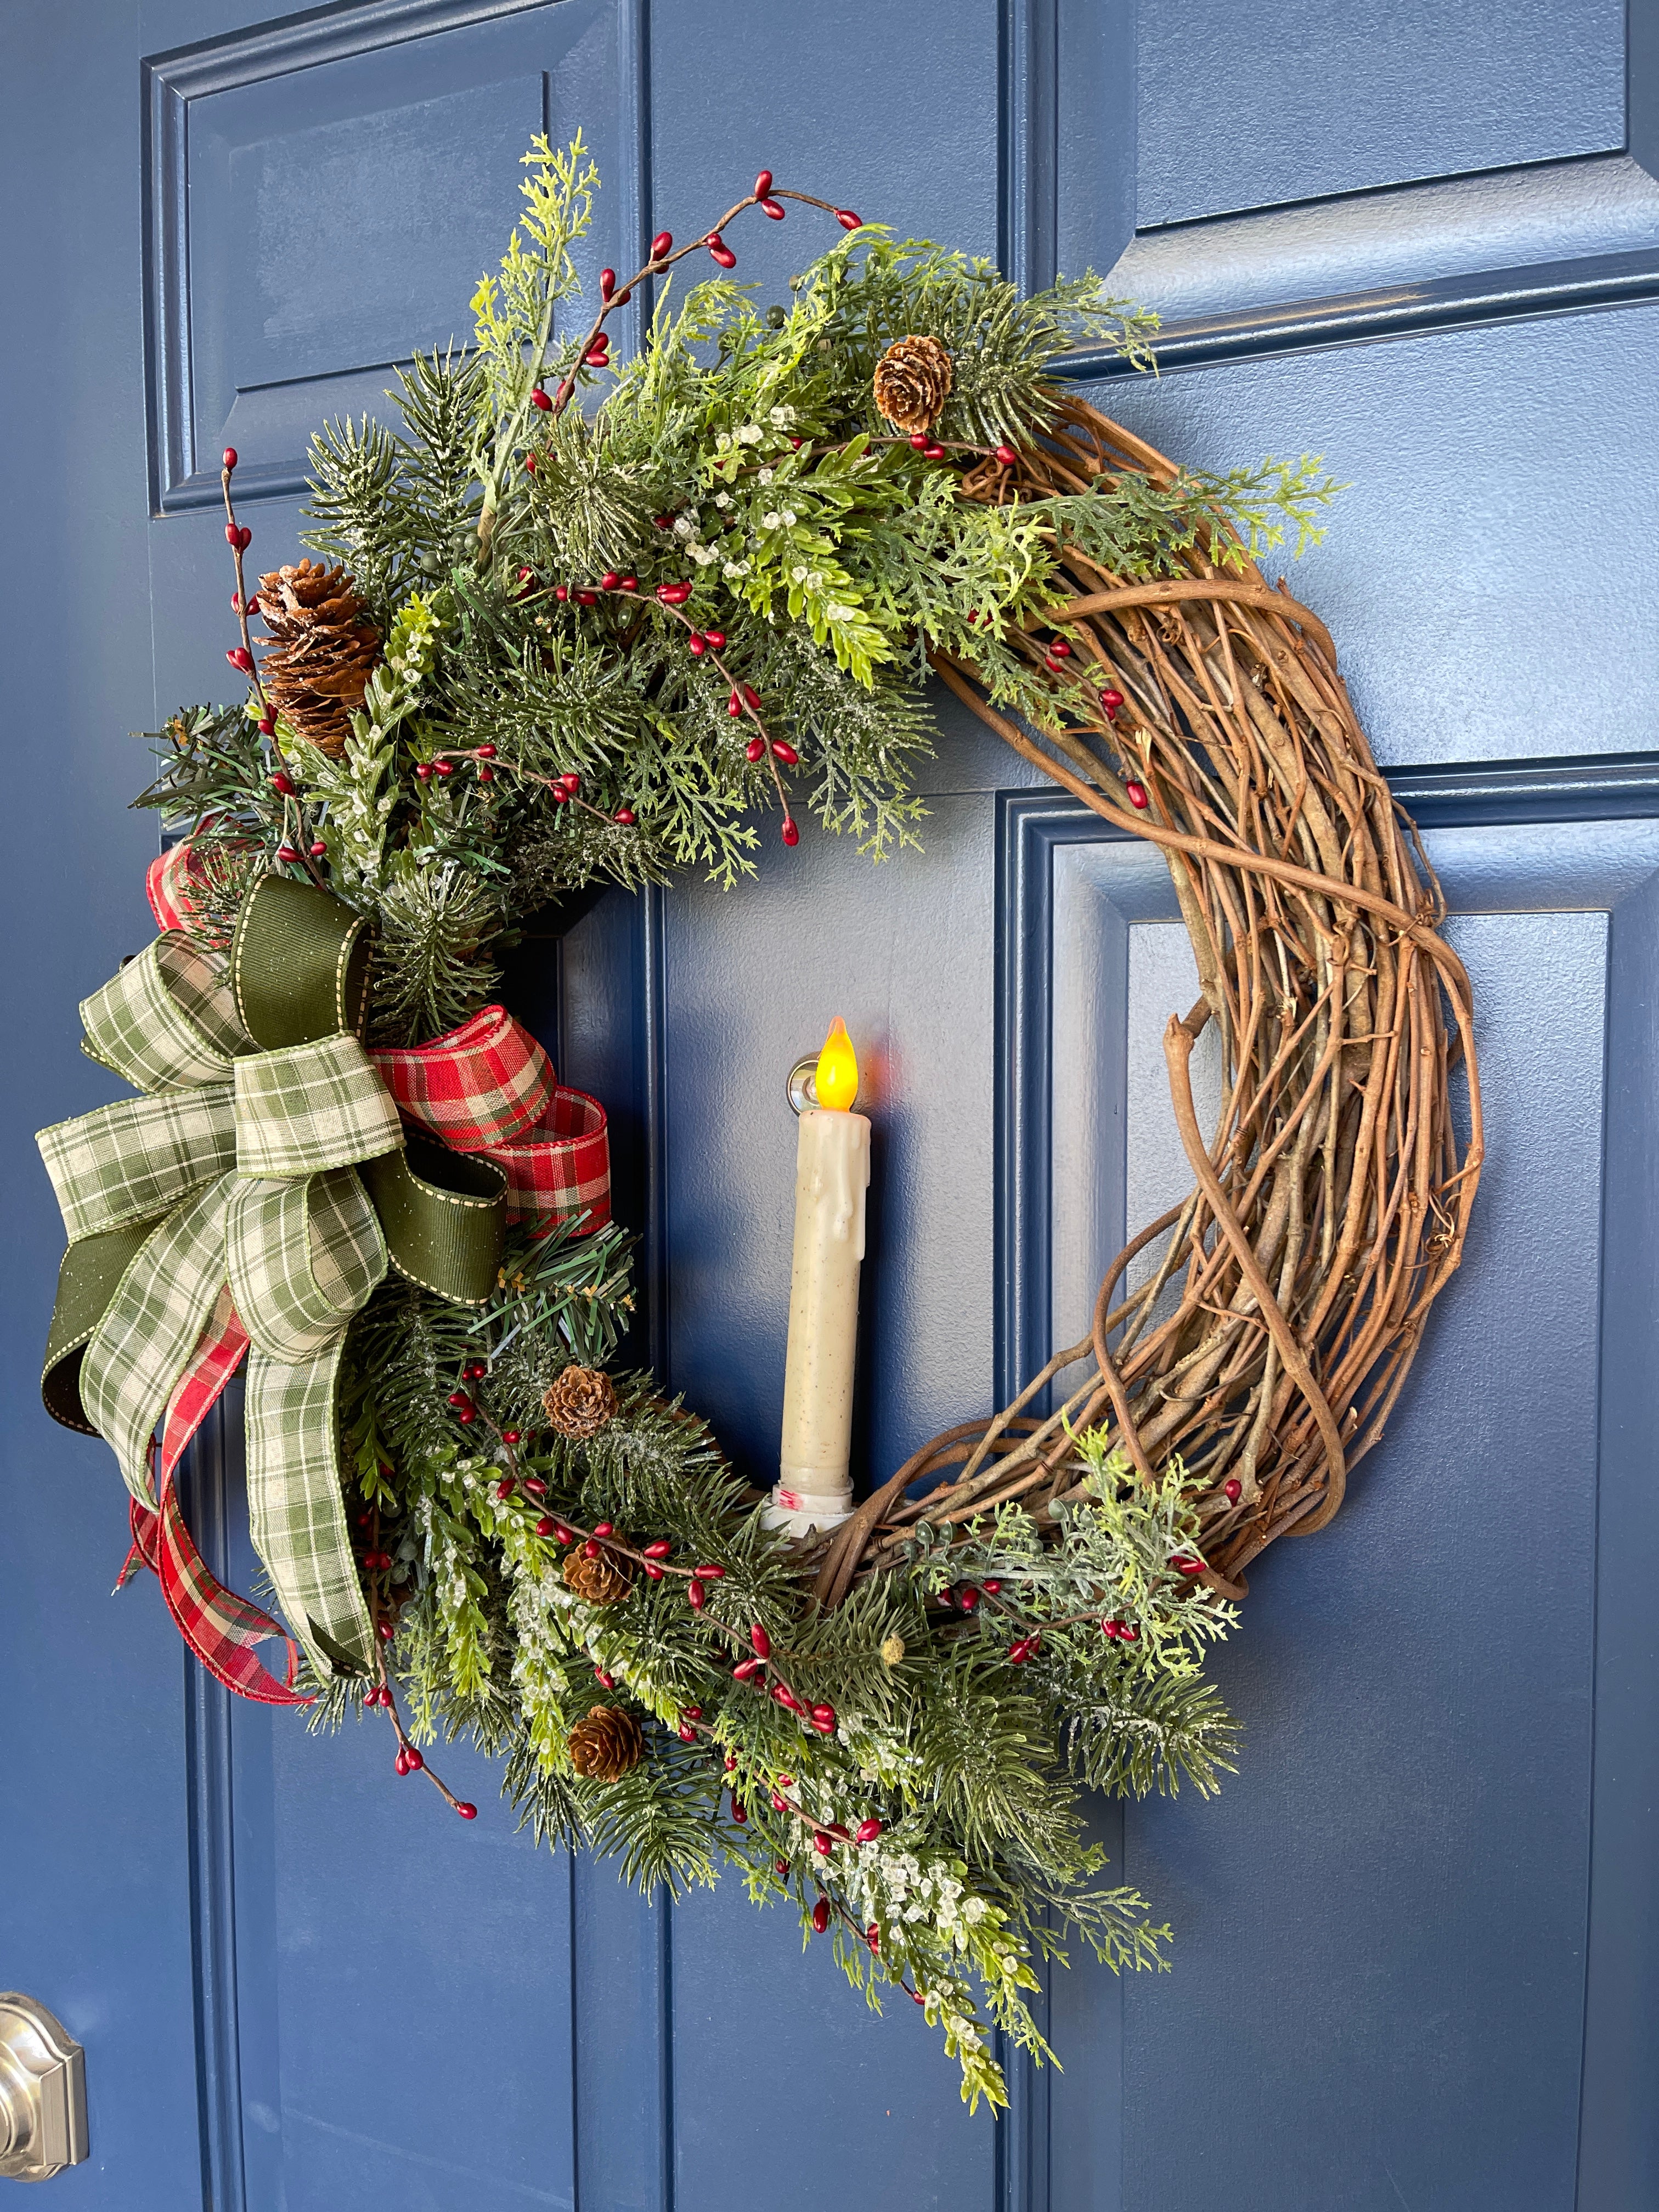 Right Side View of Christmas Grapevine Wreath with Artificial Pine Branches, Red Berries, Pinecones, with a Red, White and Green Bow and an Artificial Battery Operated Candle in the Center on a Blue Door